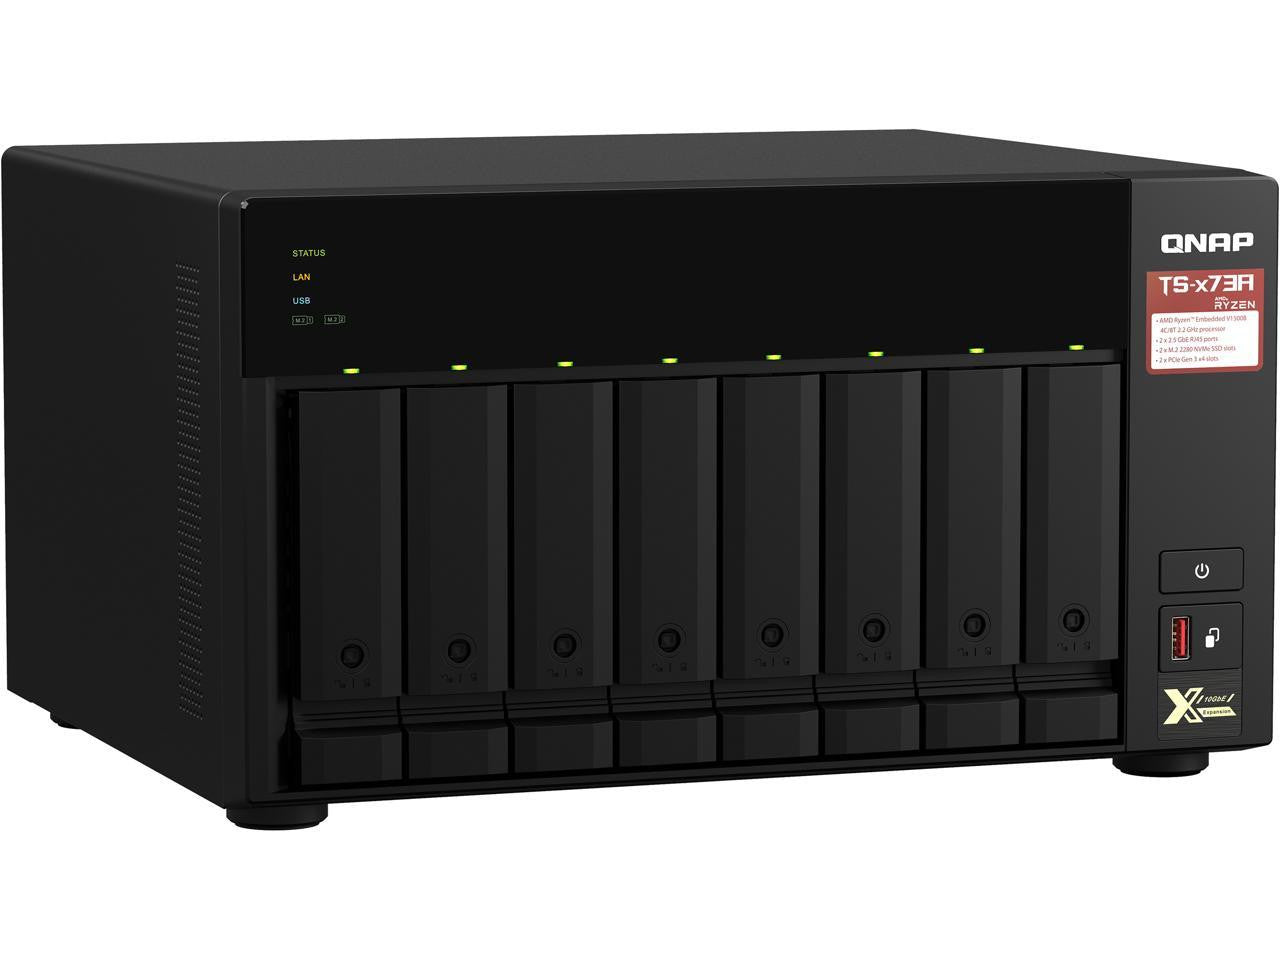 QNAP TS-873A 8-BAY NAS with 16GB DDR4 RAM and 24TB (8x3TB) Western Digital RED PLUS Drives Fully Assembled and Tested